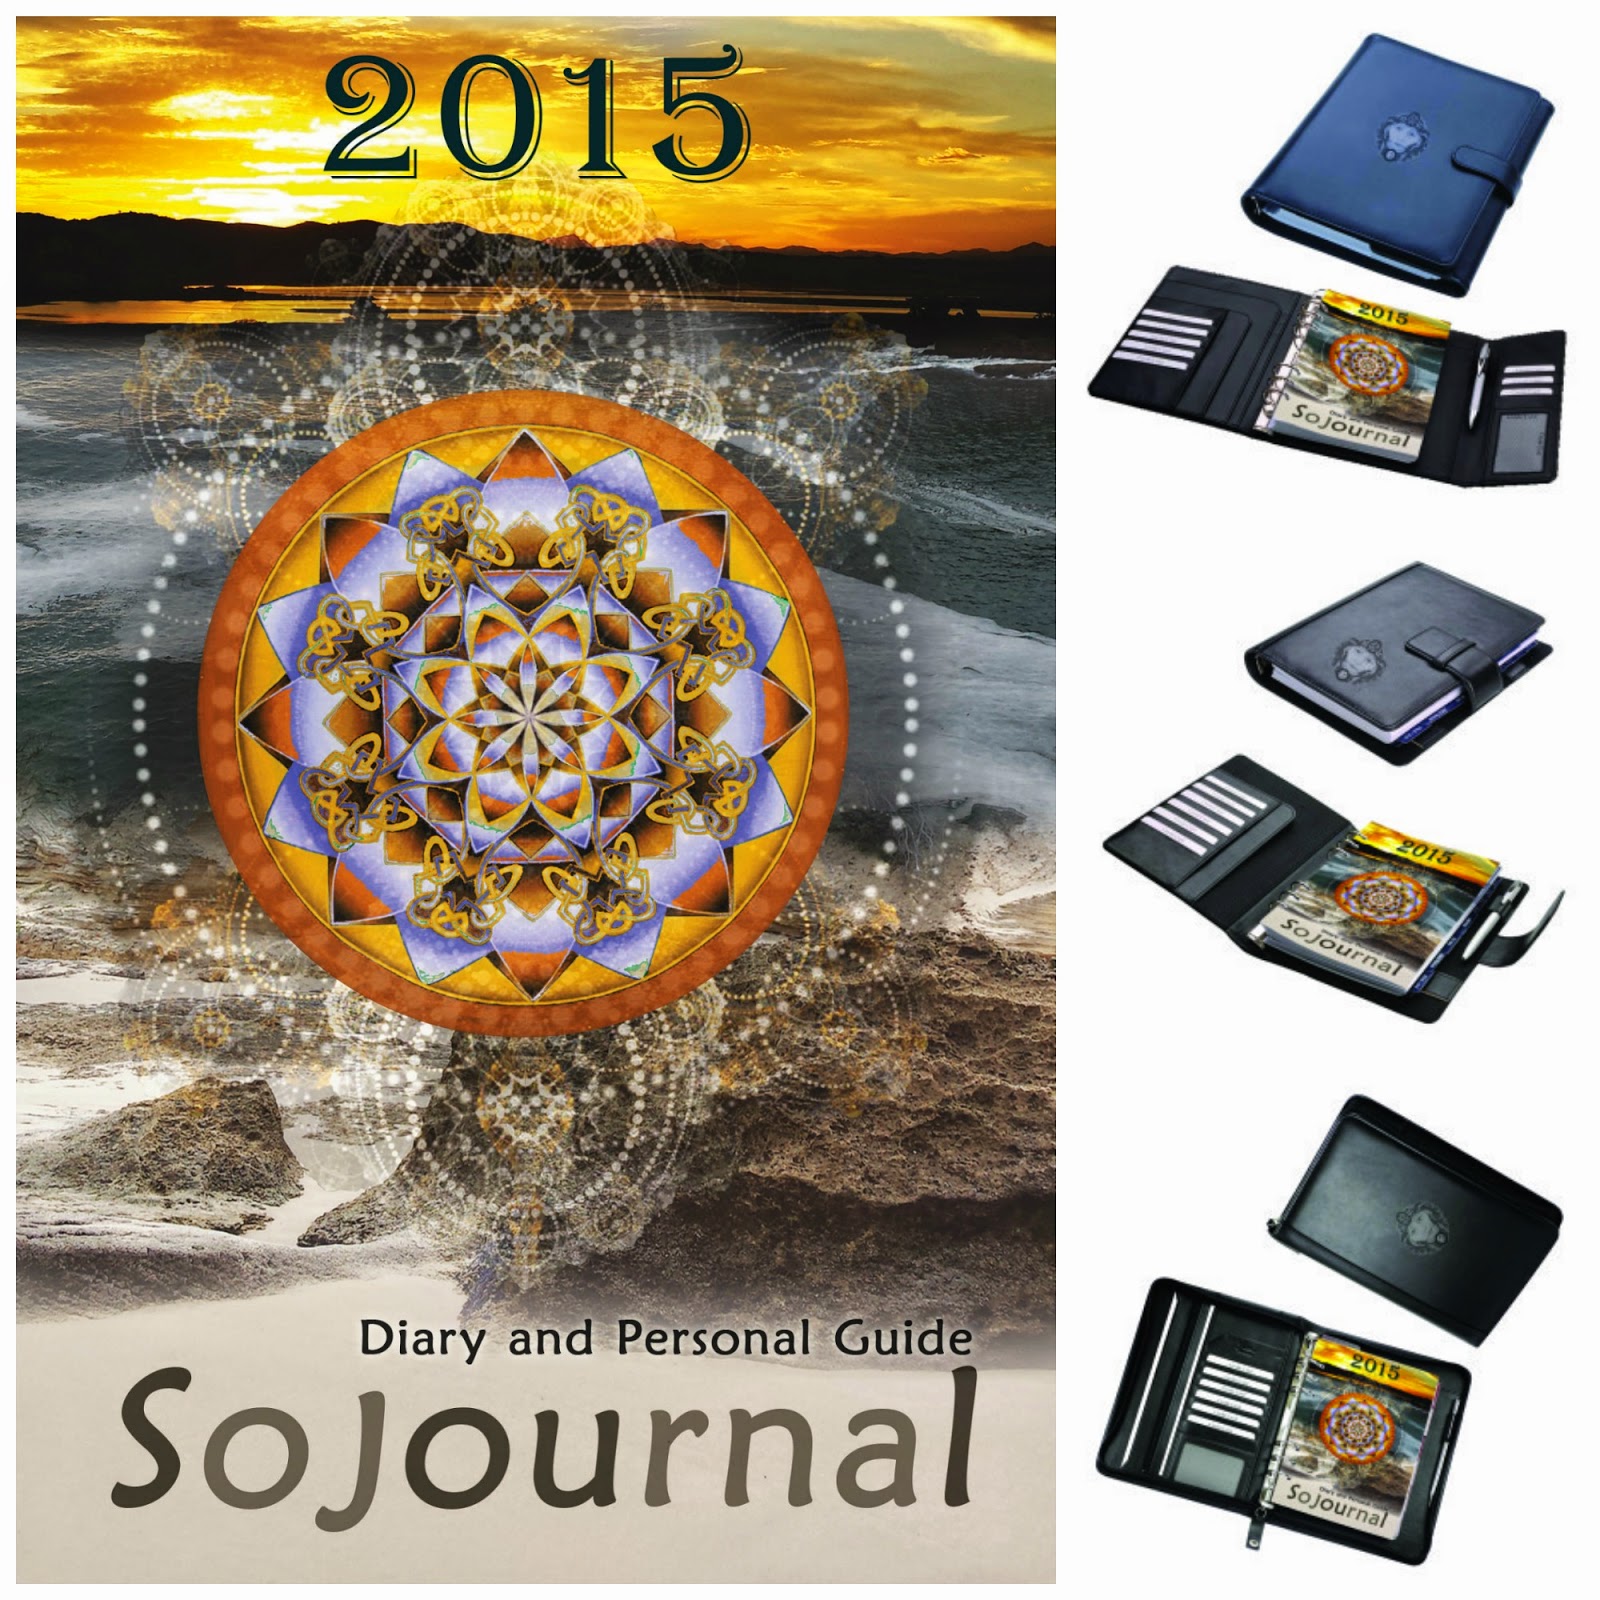 Sojournal